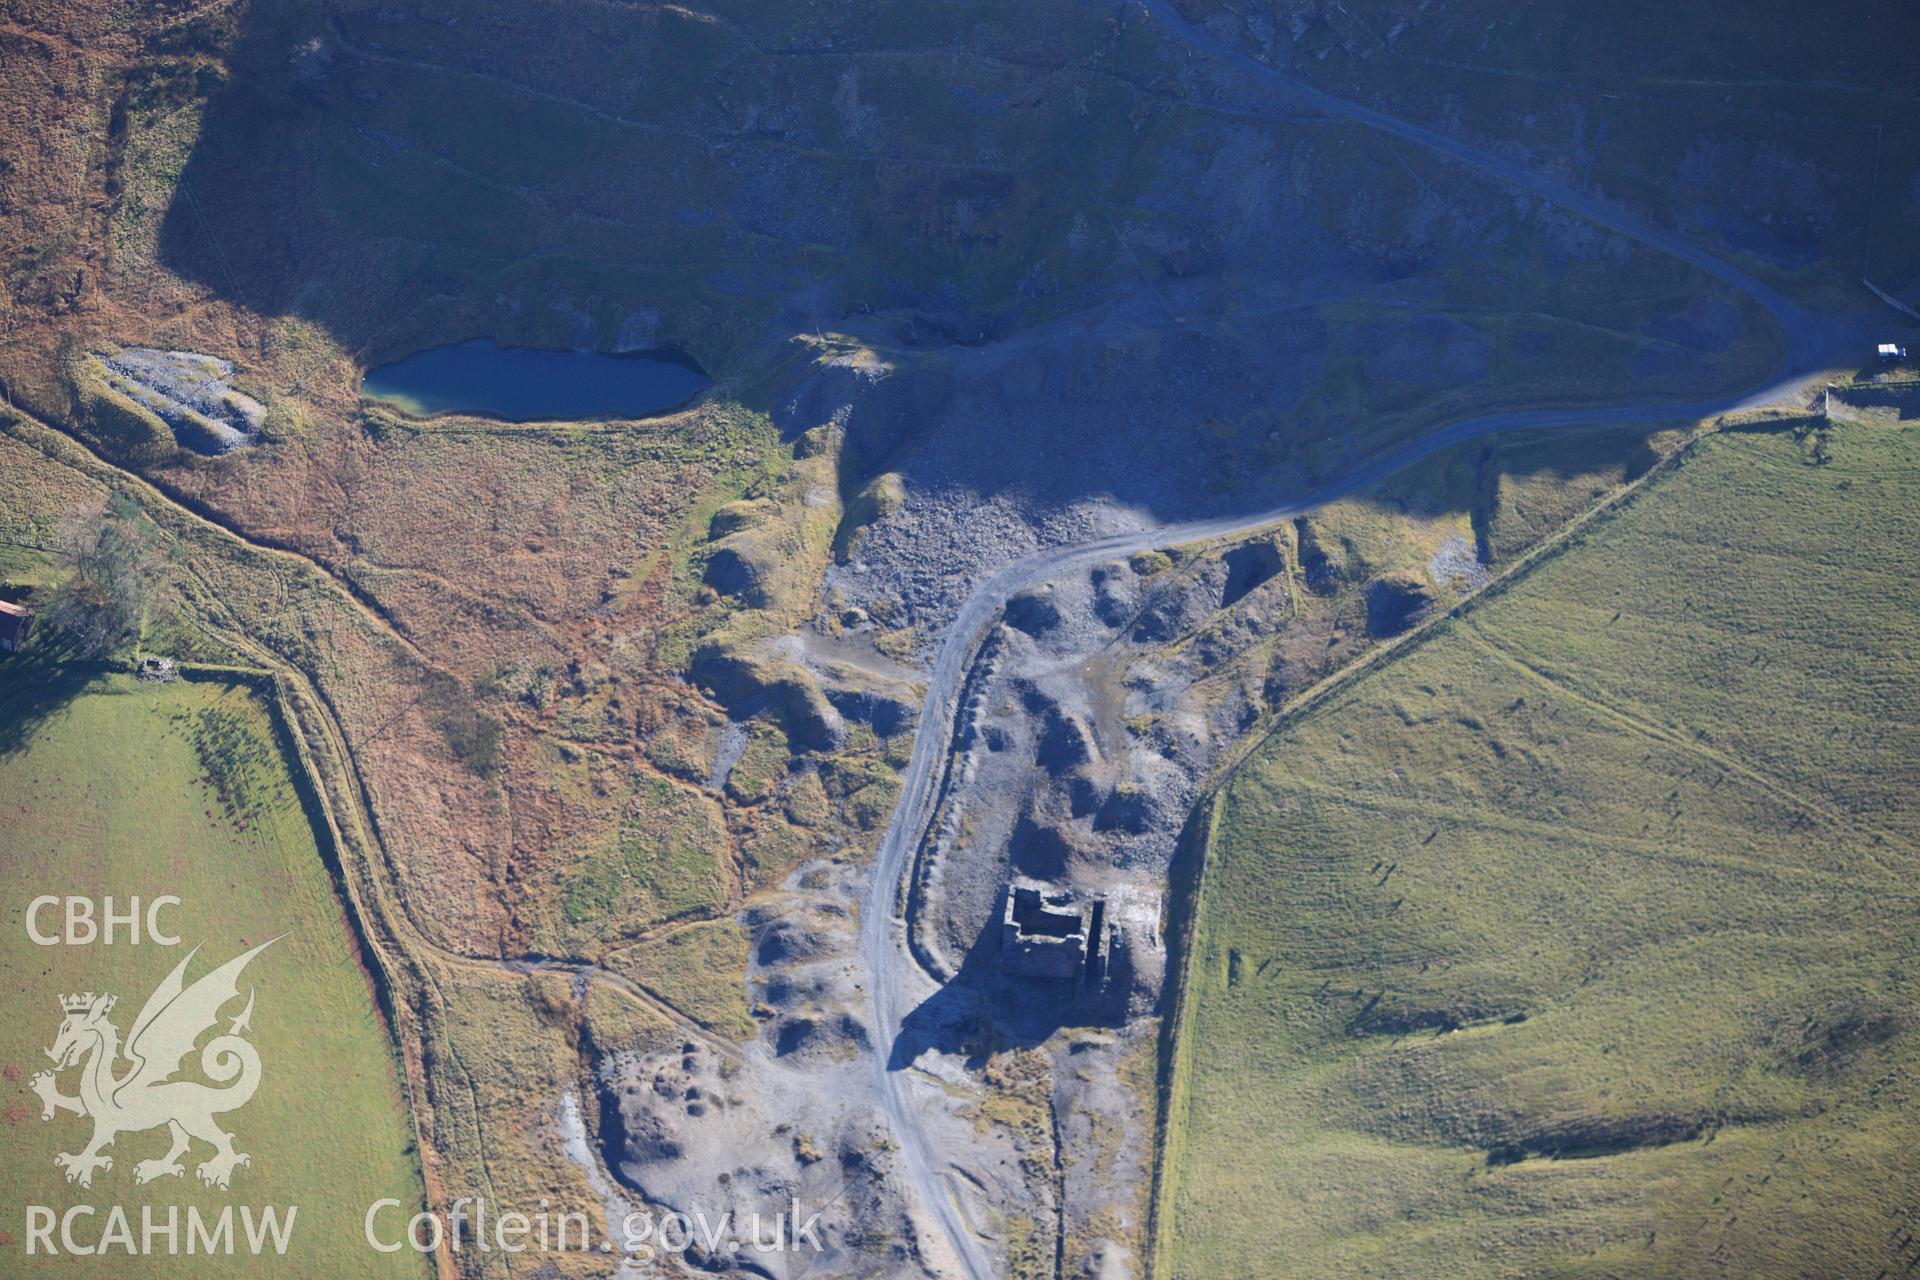 RCAHMW colour oblique photograph of Castell Mine, lead mine. Taken by Toby Driver on 05/11/2012.